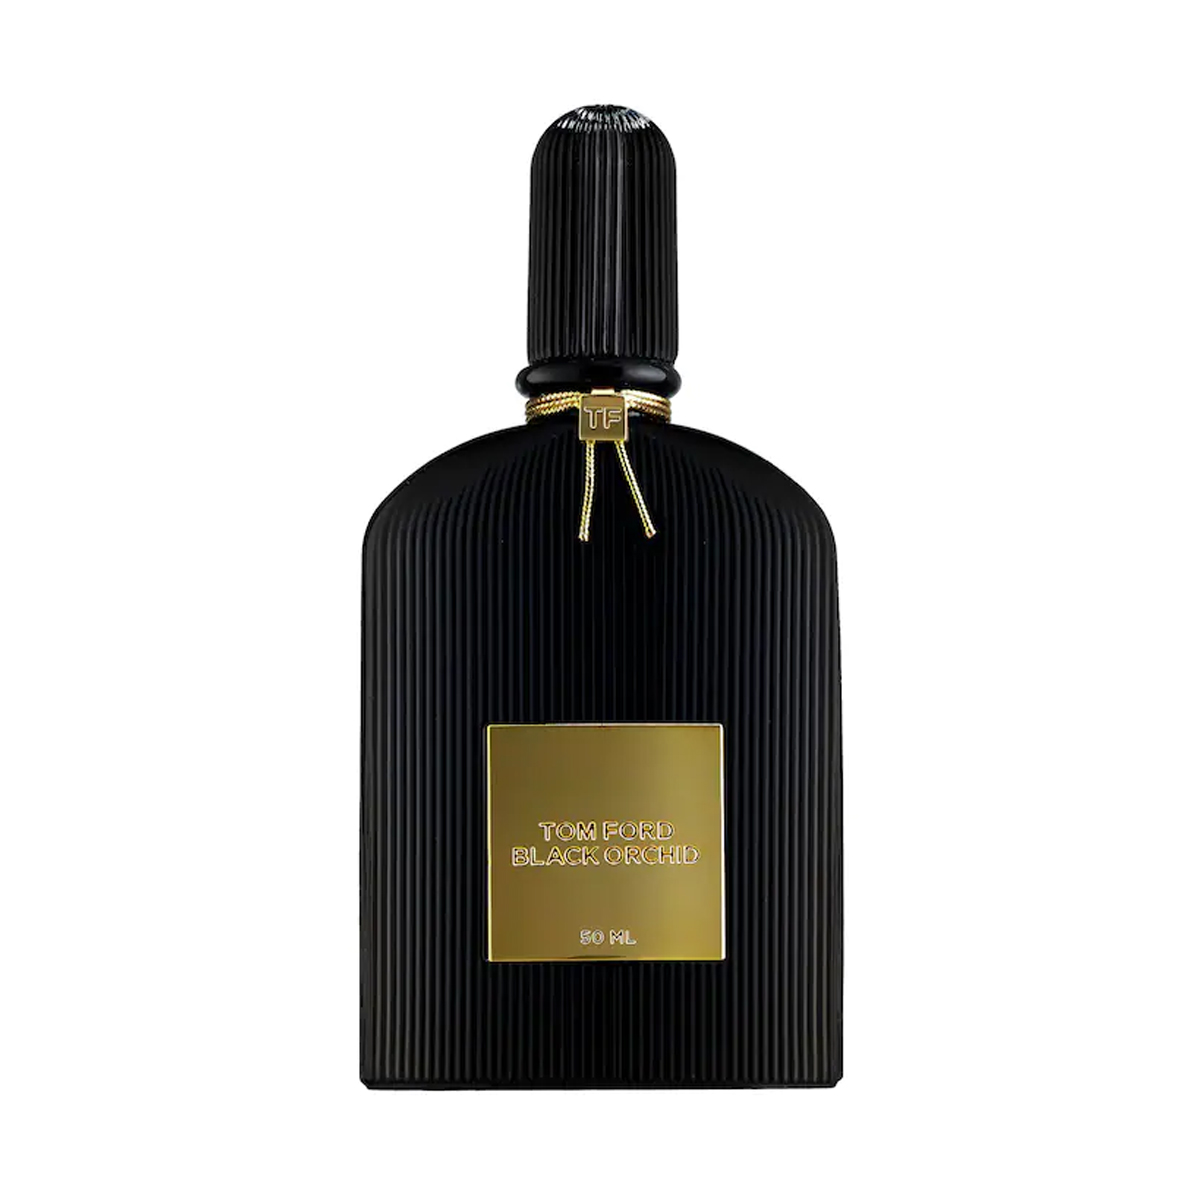 25 Expensive-Smelling Perfumes That Are So Sophisticated | Who What Wear UK